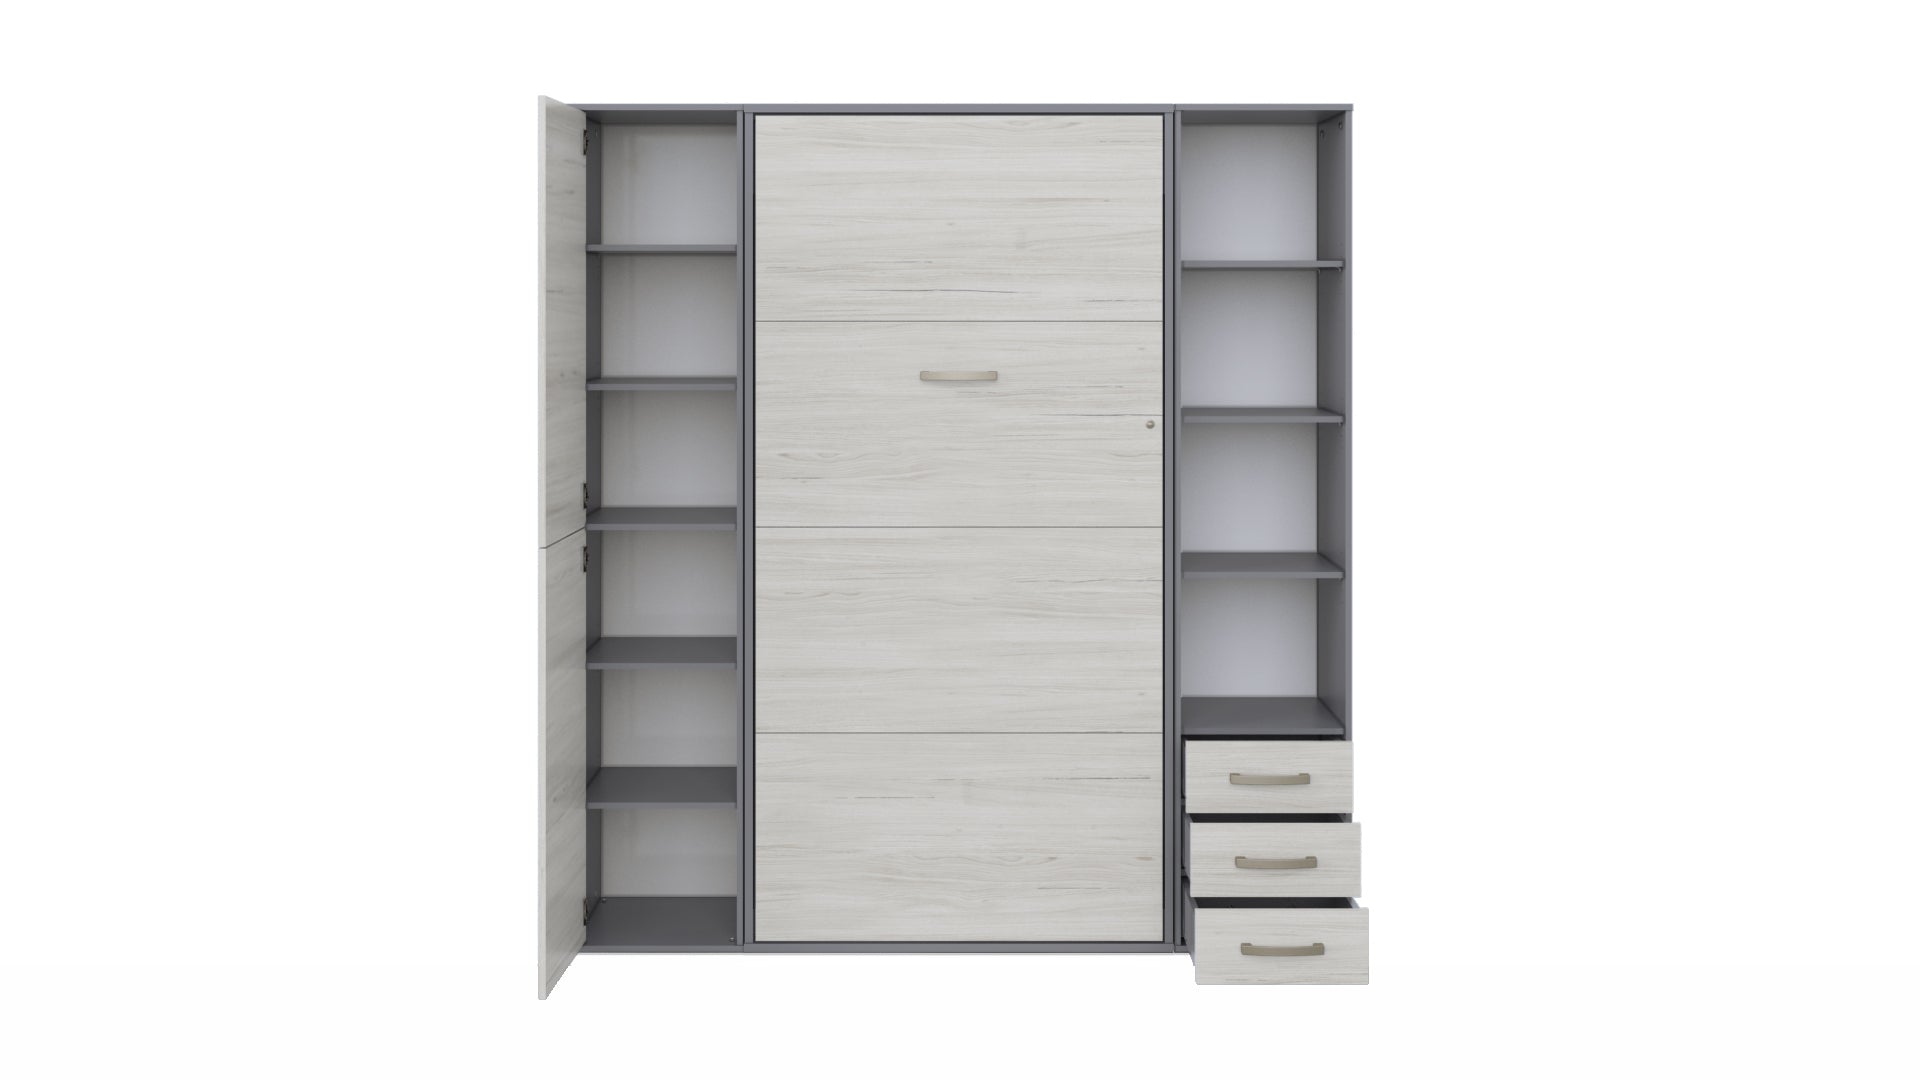 Maxima House - Invento Vertical Wall Bed European Twin Size With 2 Cabinets IN90V-08/09W